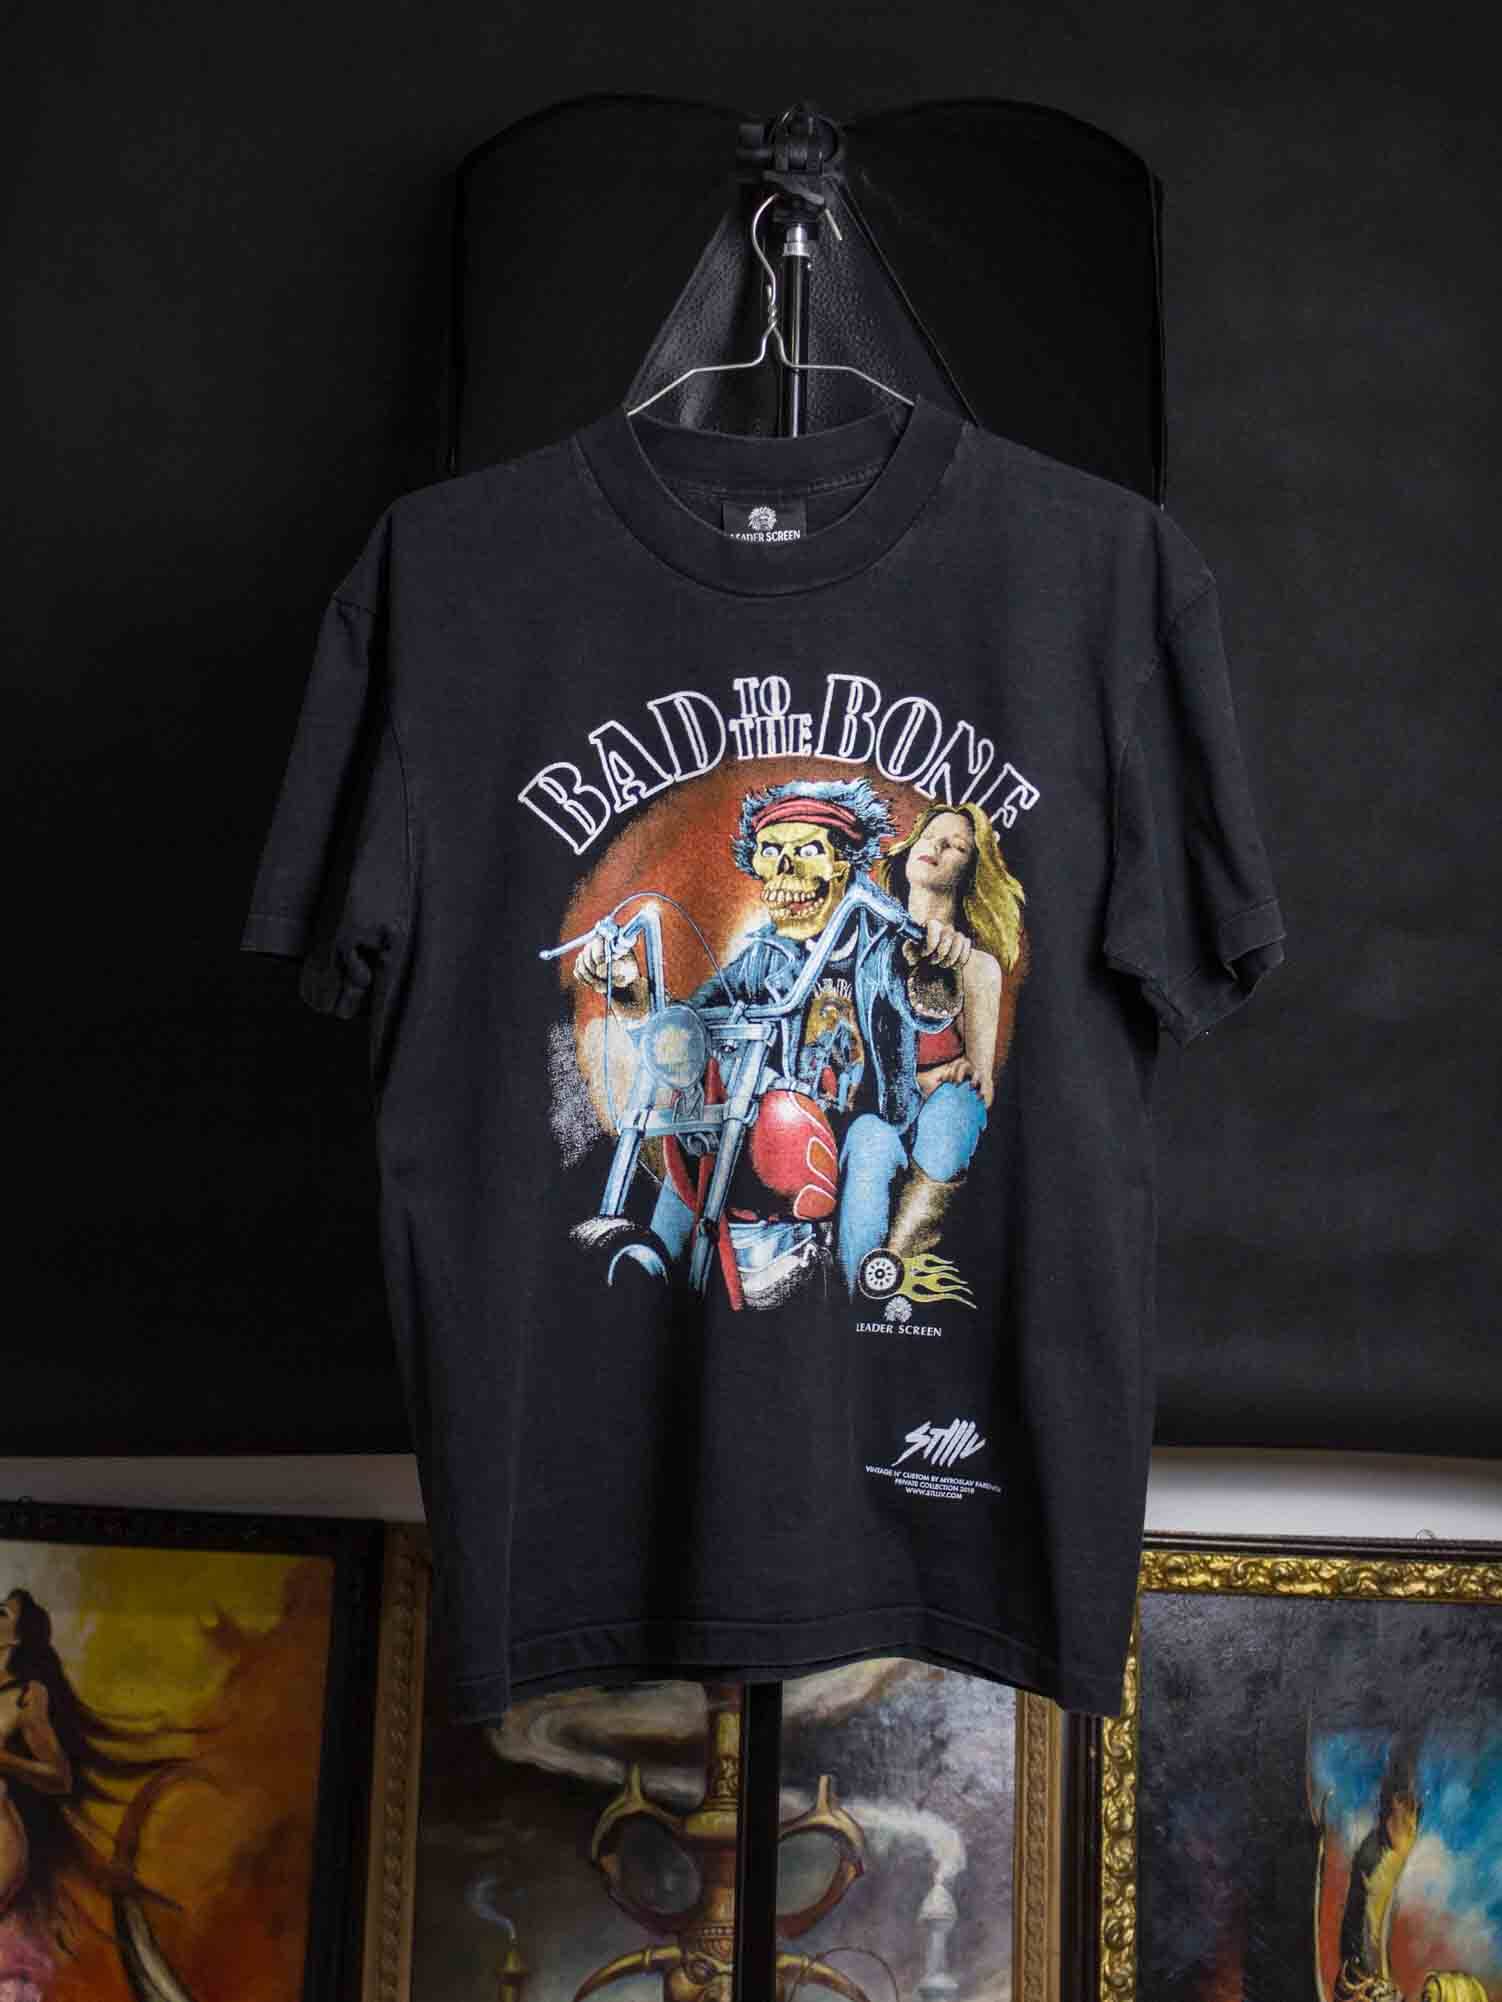 Bad to the Bone 80’s Vintage T-Shirt